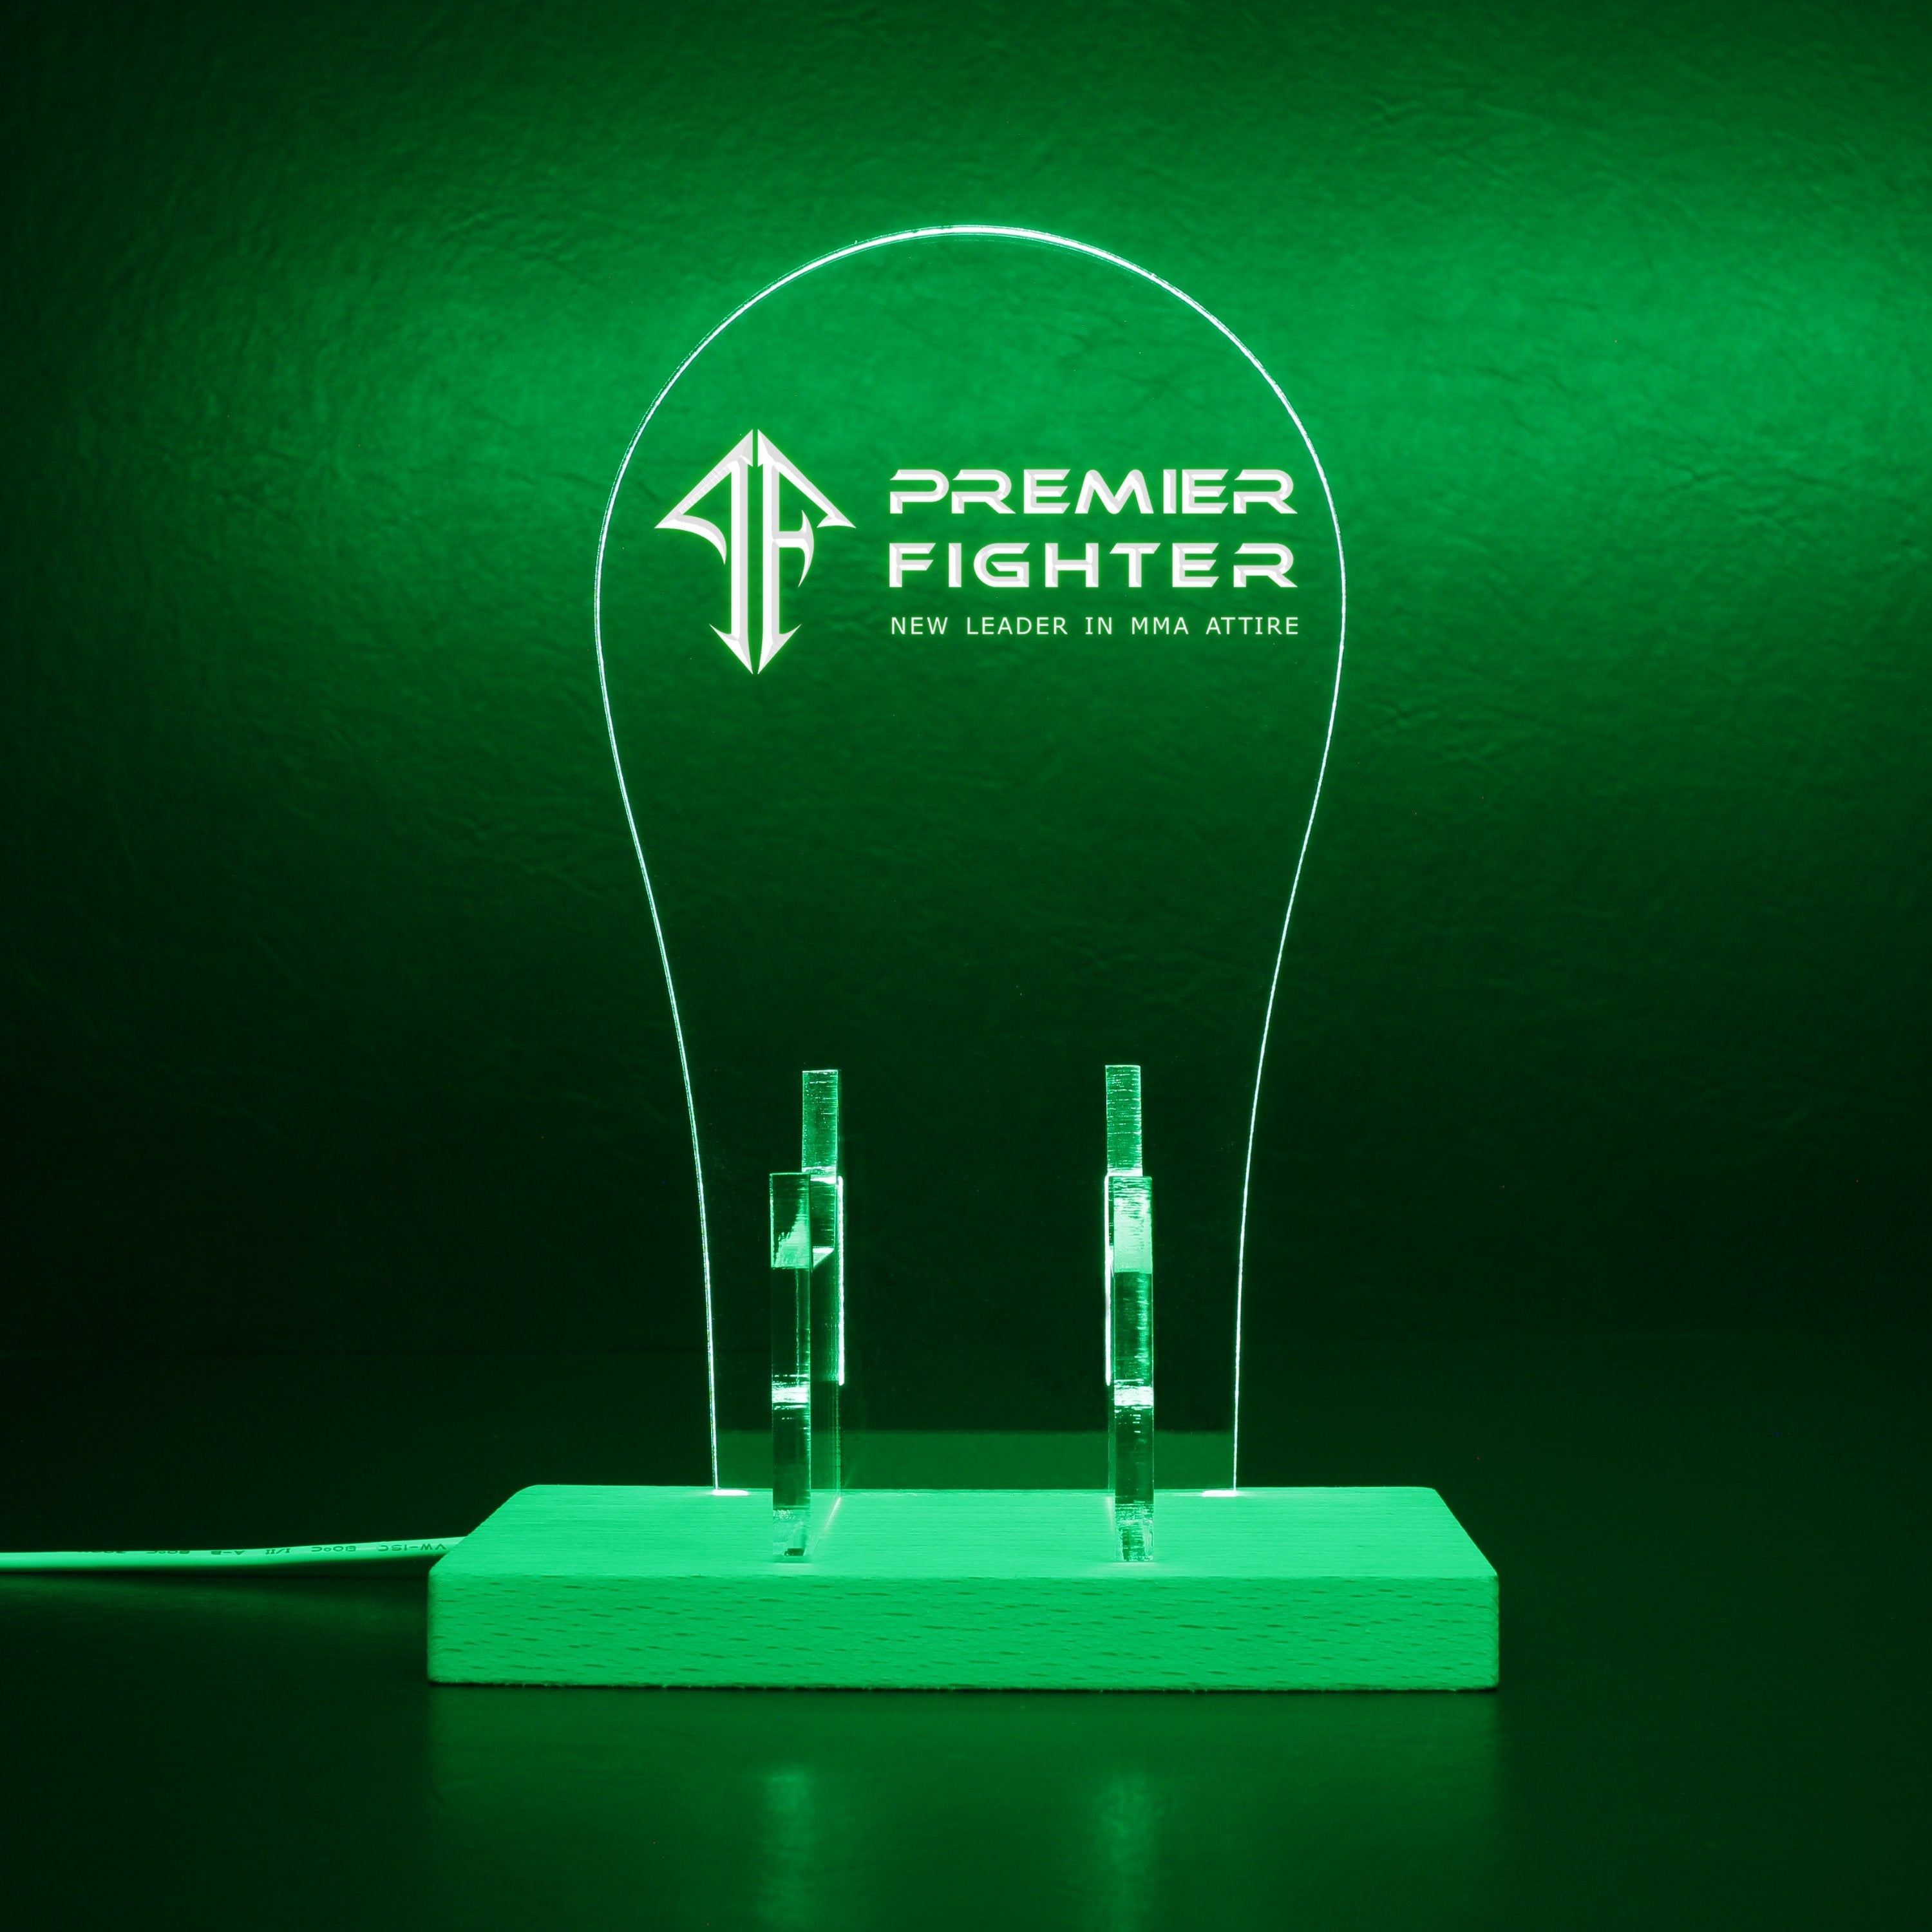 Premier Fighter LED Gaming Headset Controller Stand